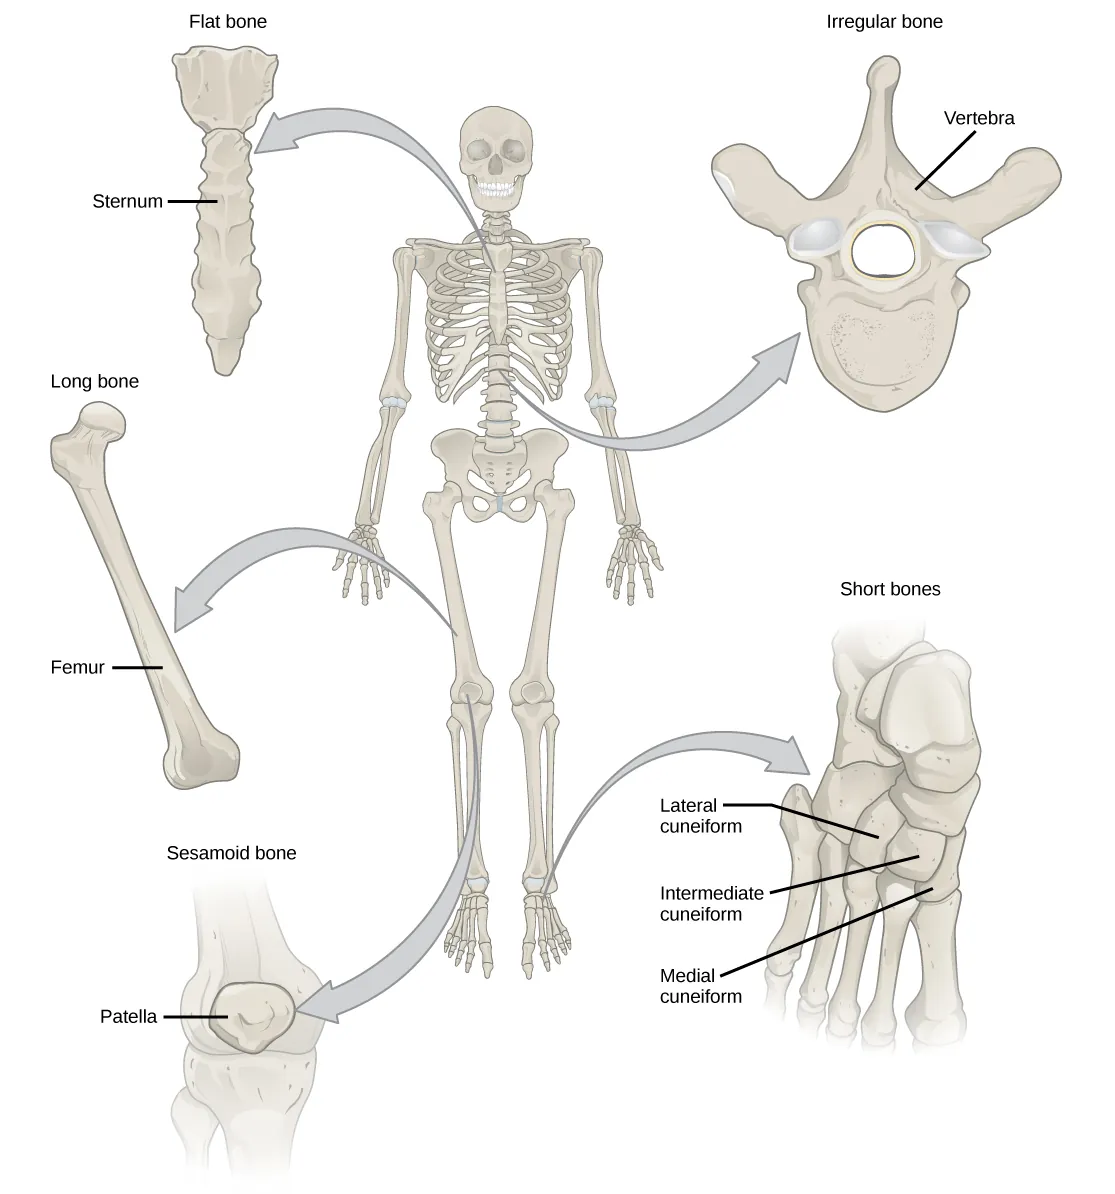  Illustration shows classification of different bone types. The sternum at the front, middle of the rib cage is a flat bone. The femur is a long bone. The patella is a sesamoid bone. The vertebrae are irregular bones, and the bones of the foot are short bones.